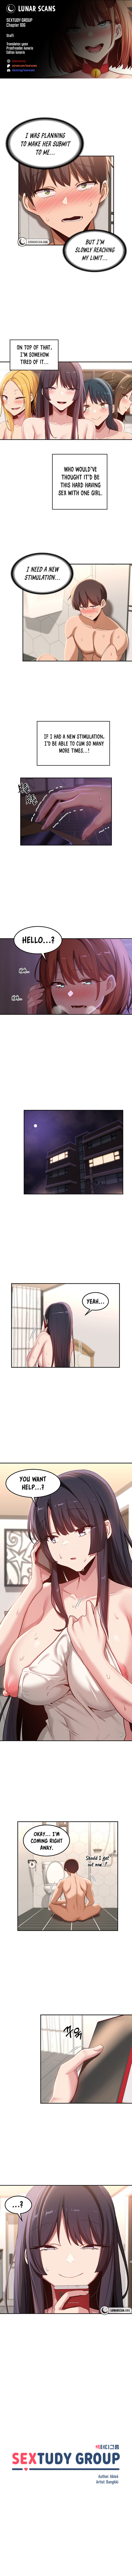 Panel Image 1 for chapter 106 of manhwa Sex Study Group on read.oppai.stream